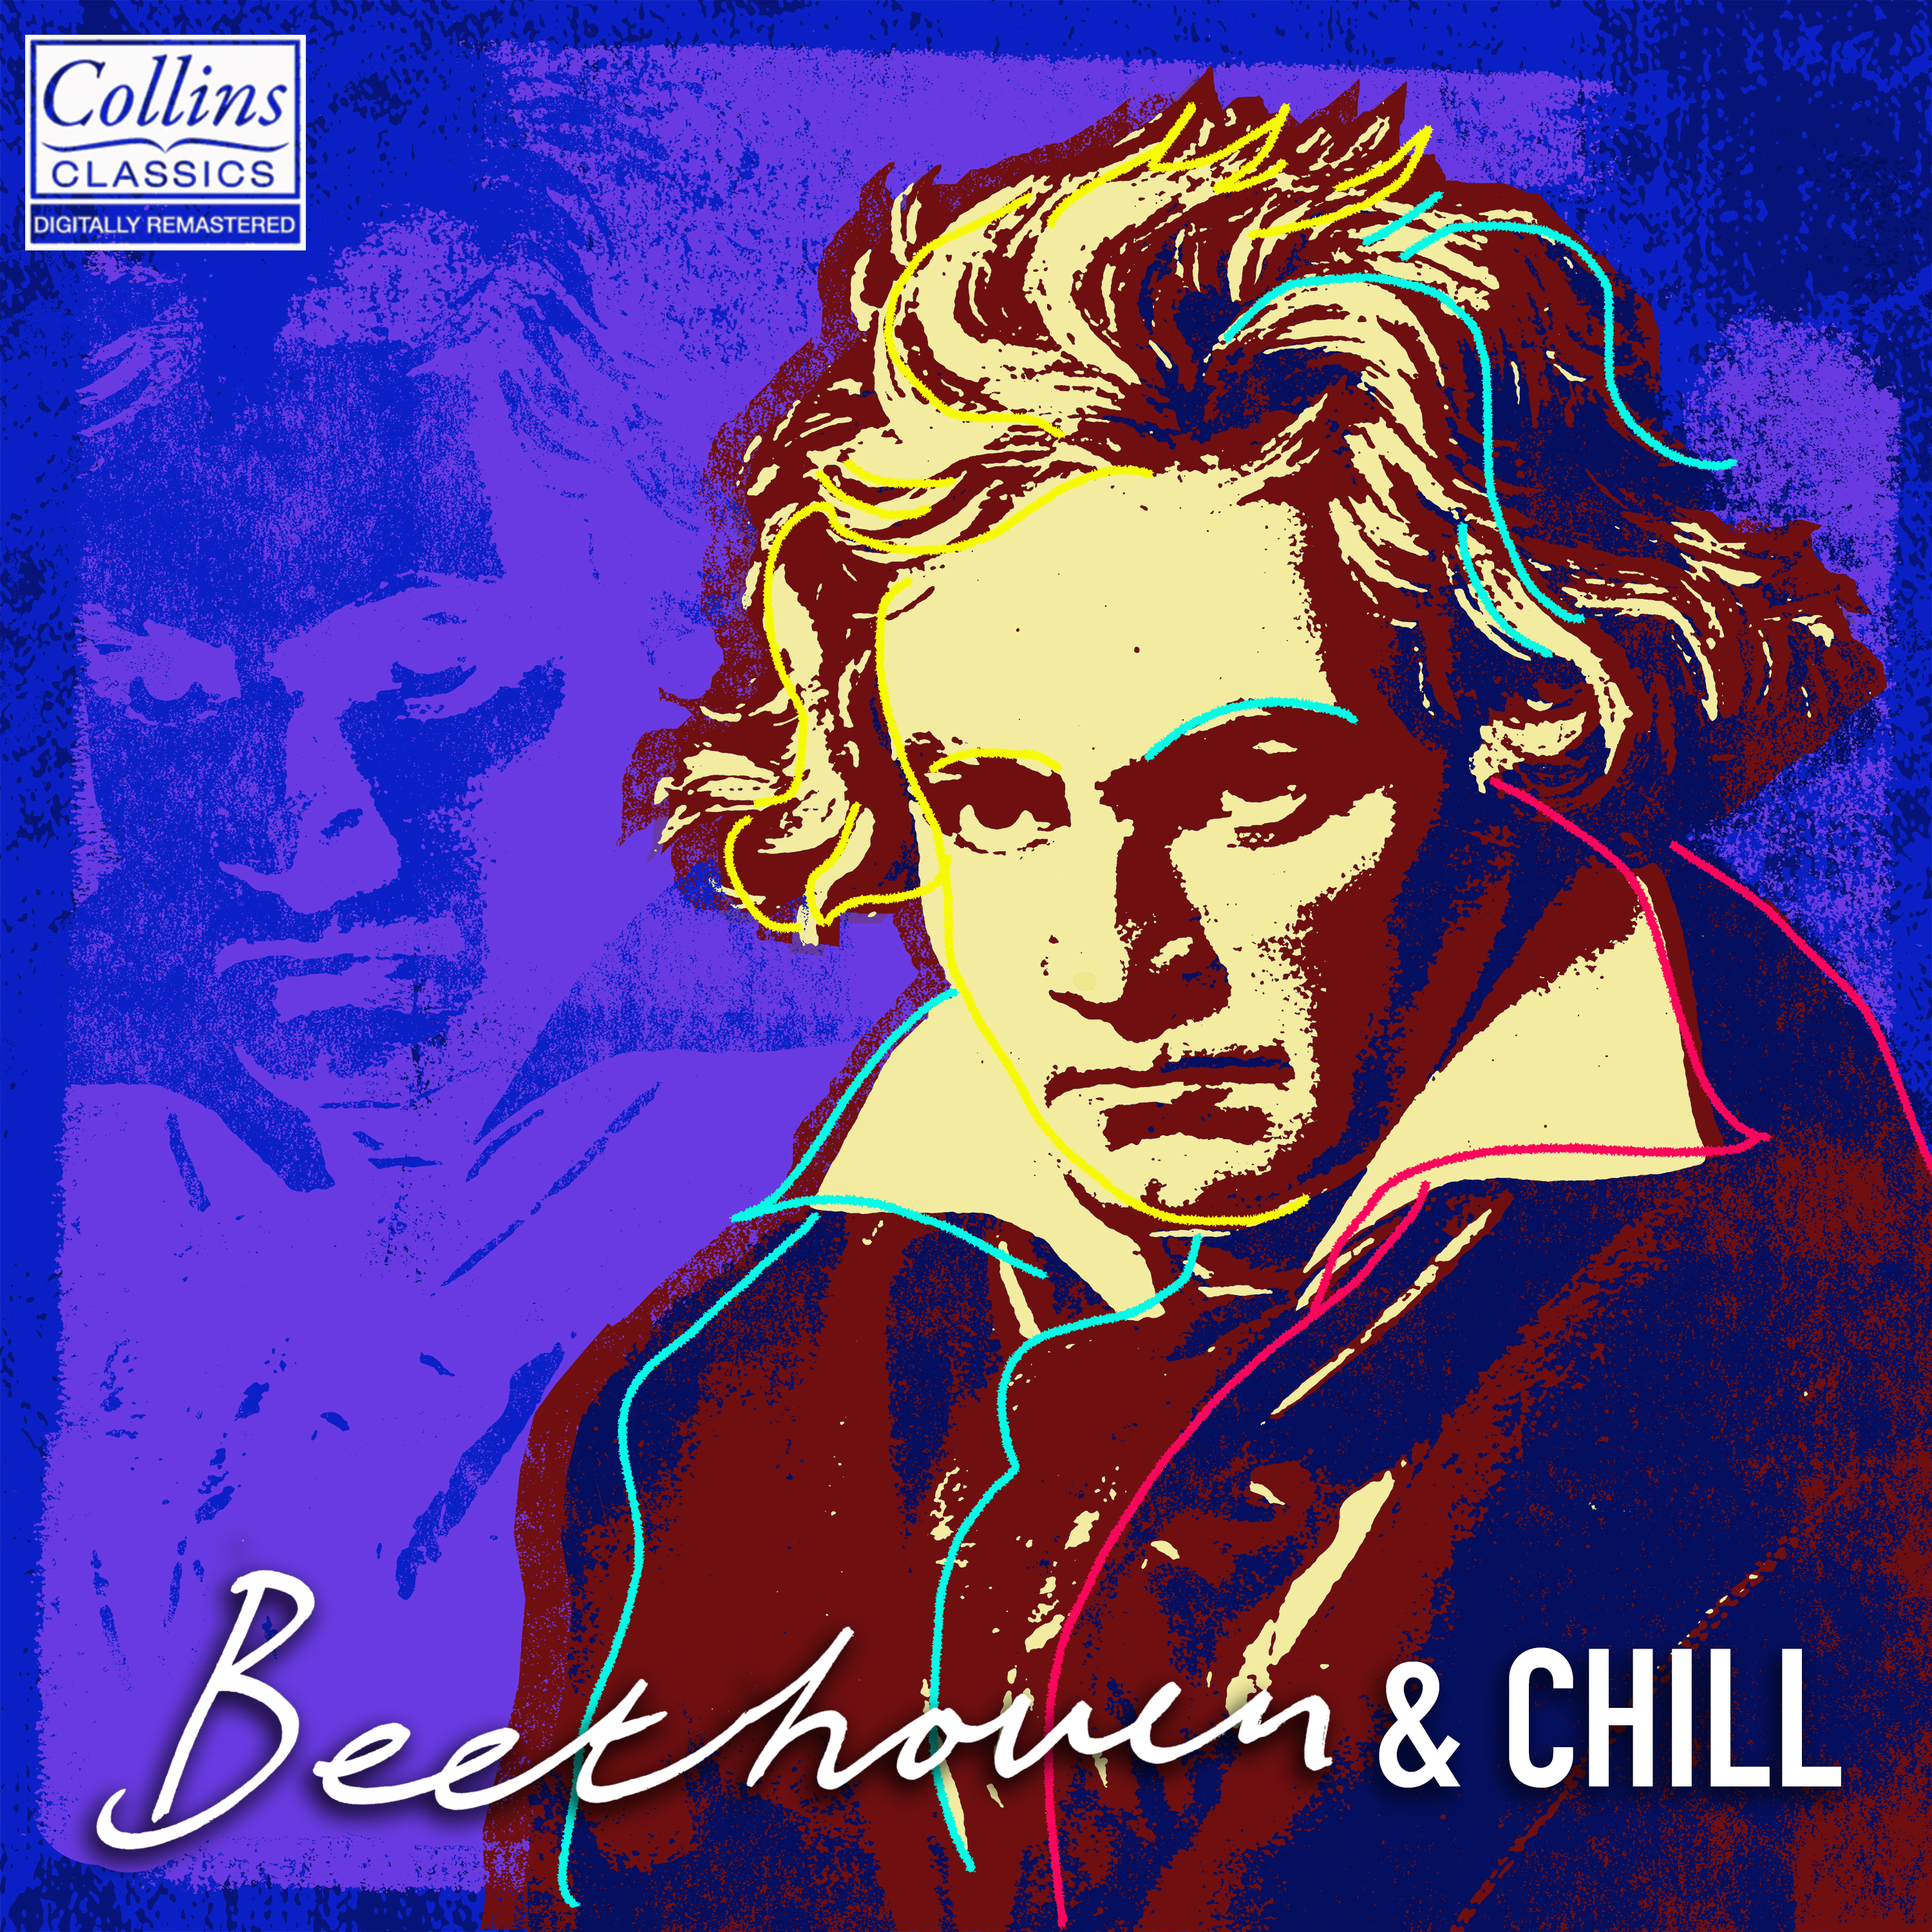 Beethoven and Chill